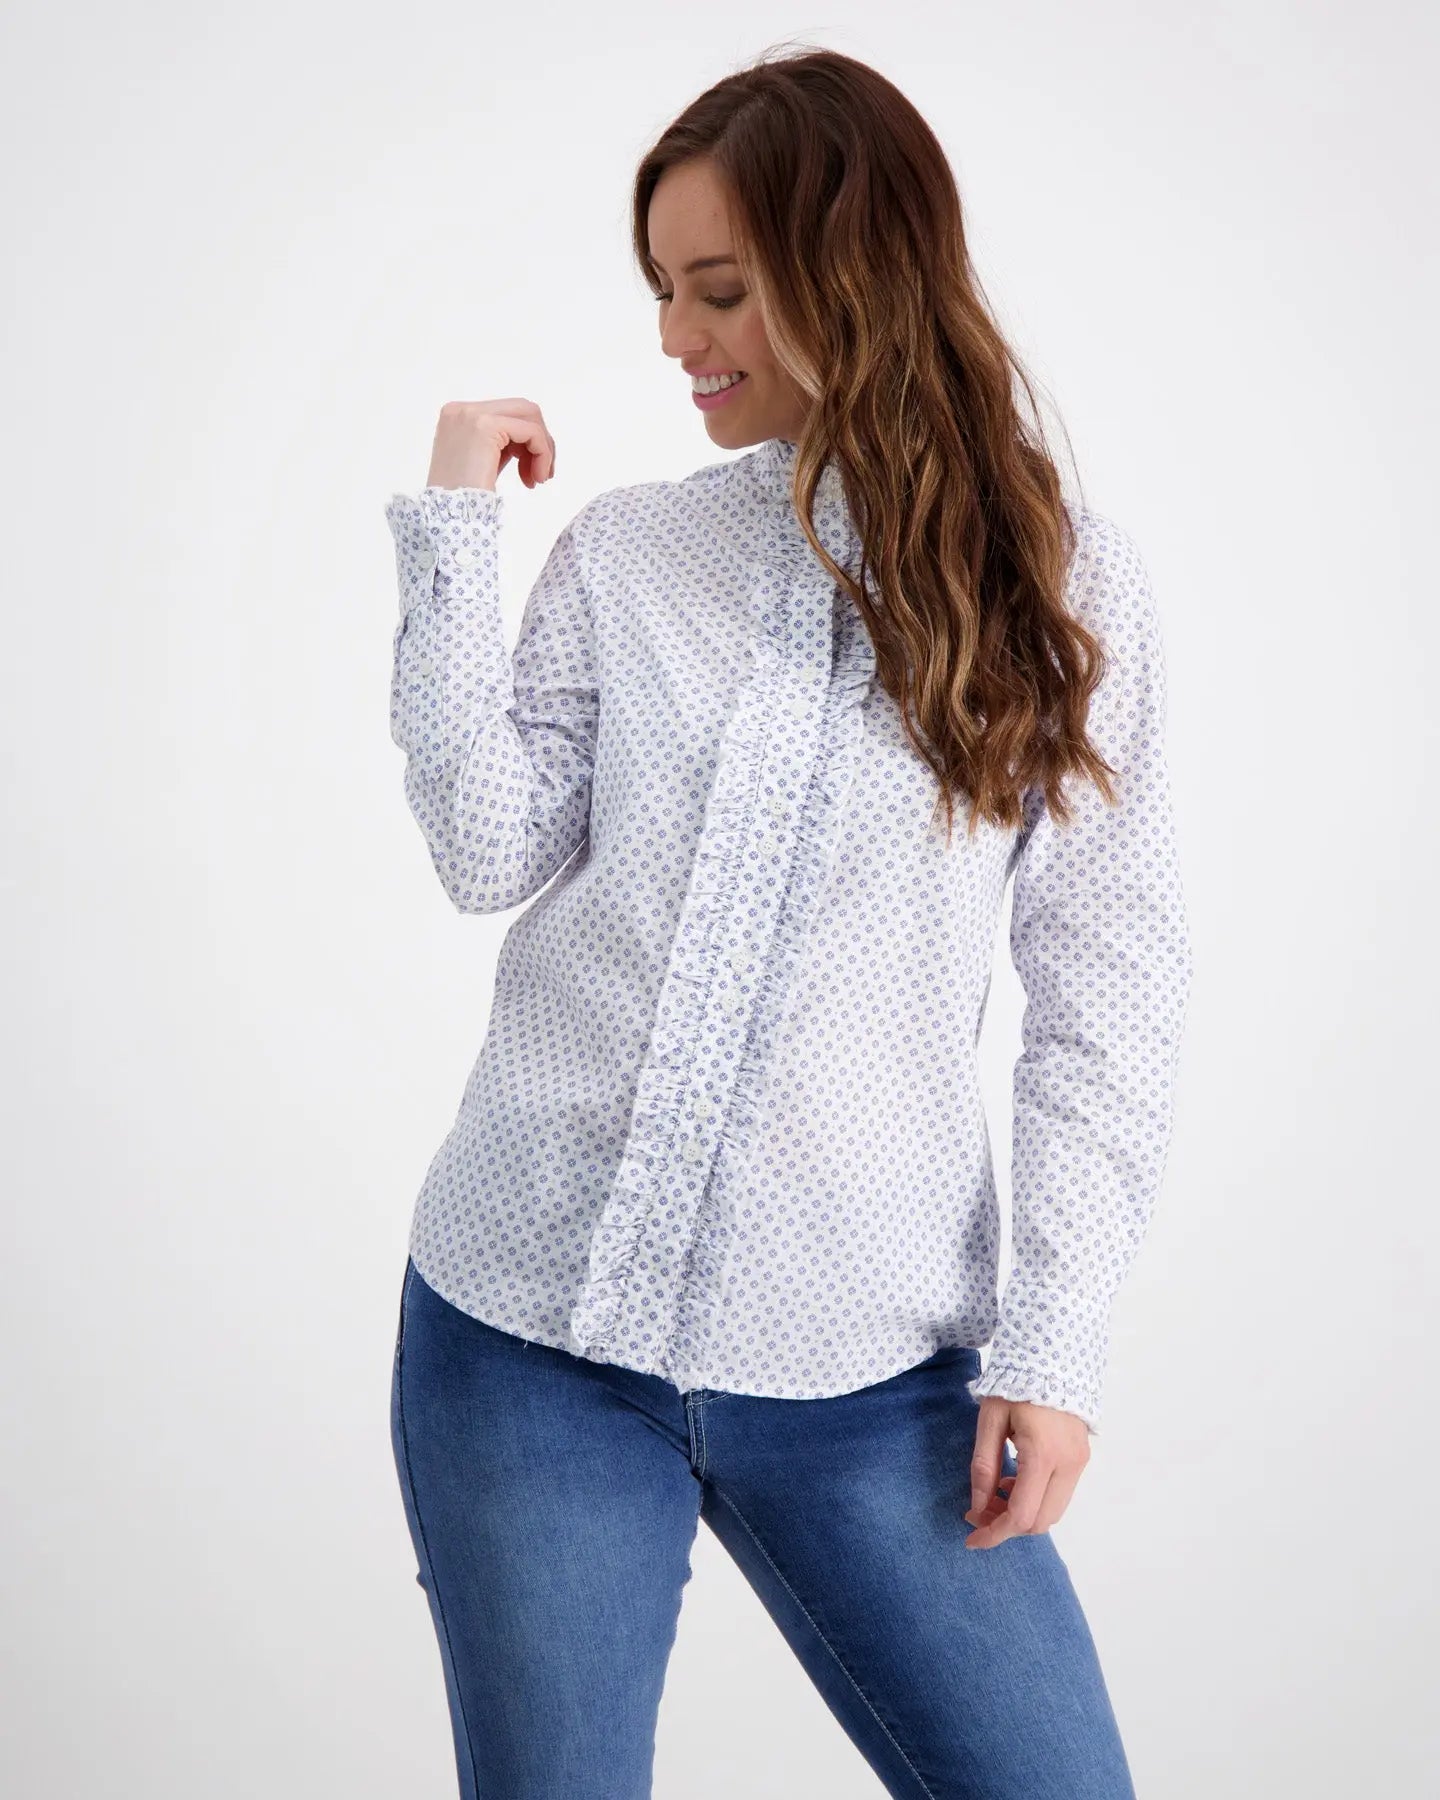 White Ruffle Shirt With Light Blue Details Outback Supply Co